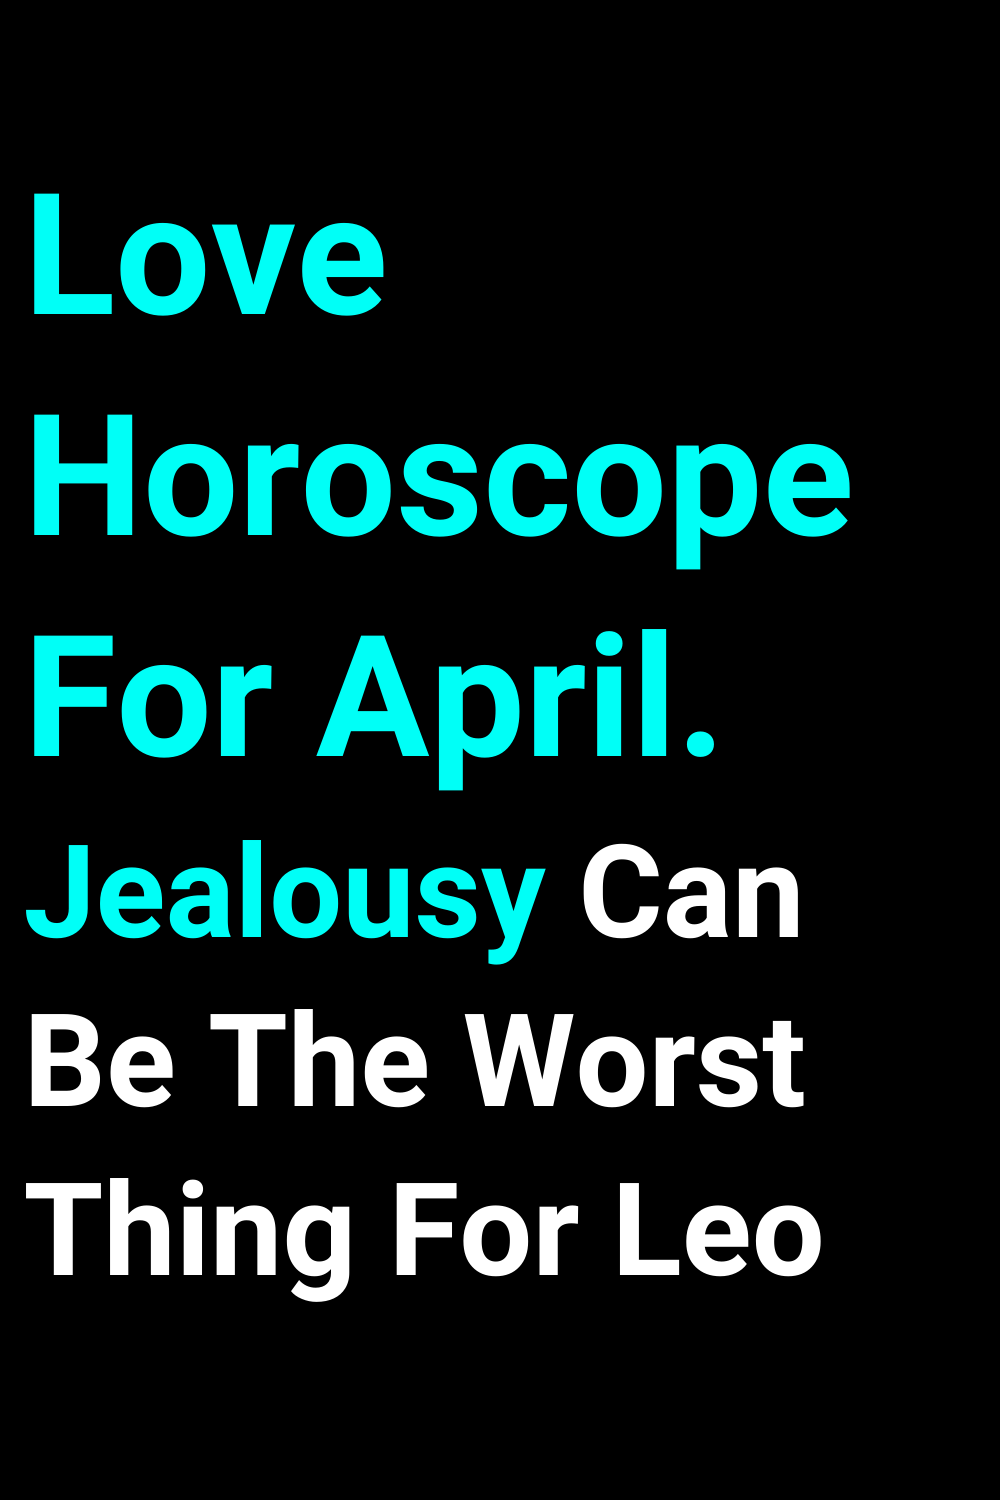 Love Horoscope For April. Jealousy Can Be The Worst Thing For Leo